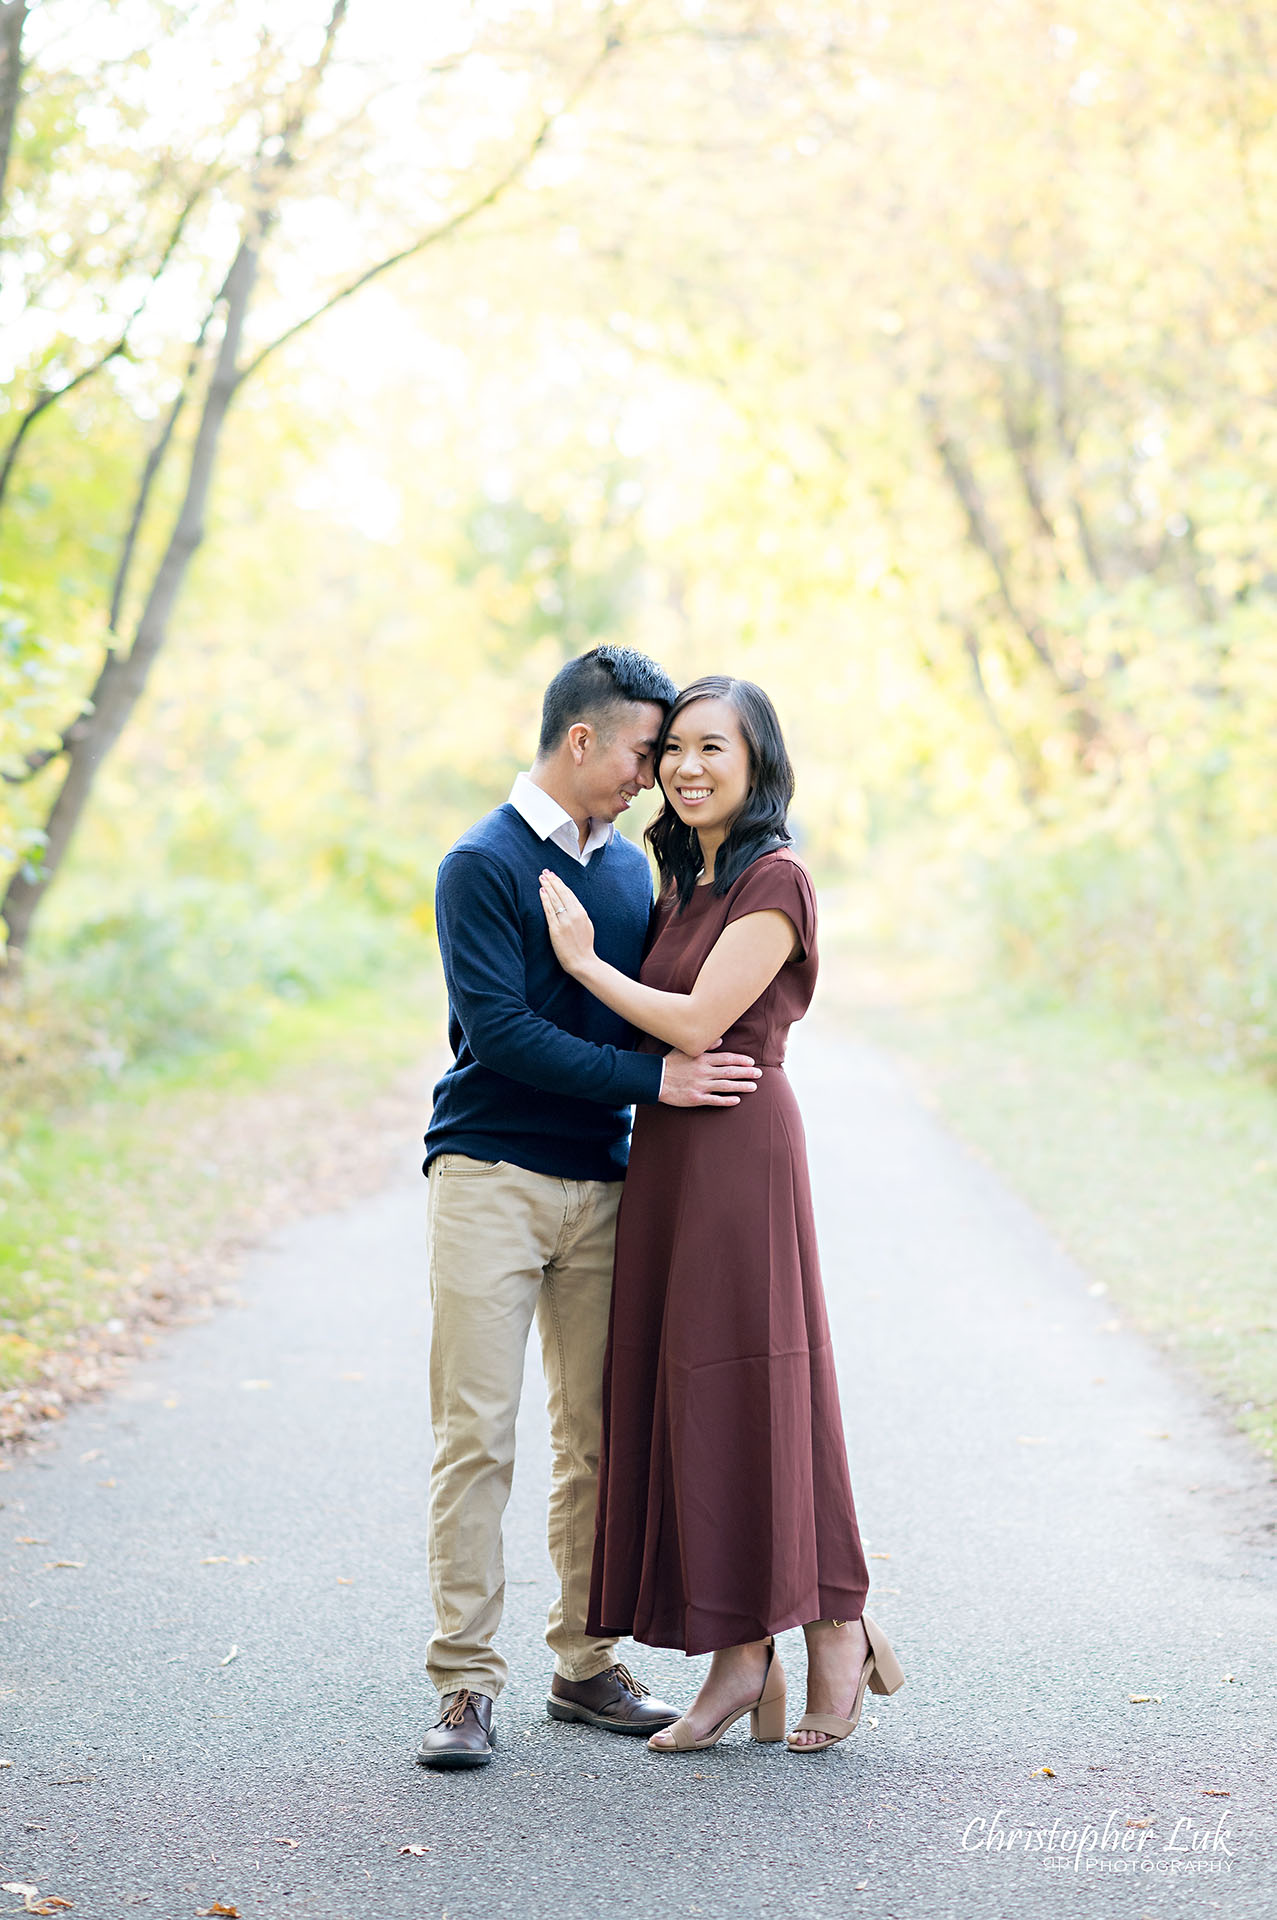 Christopher Luk Toronto Wedding Engagement Session Photographer Autumn Fall Leaves Natural Candid Photojournalistic Bride Groom Hugging Hug Holding Each Other Together Pathway Hiking Trail